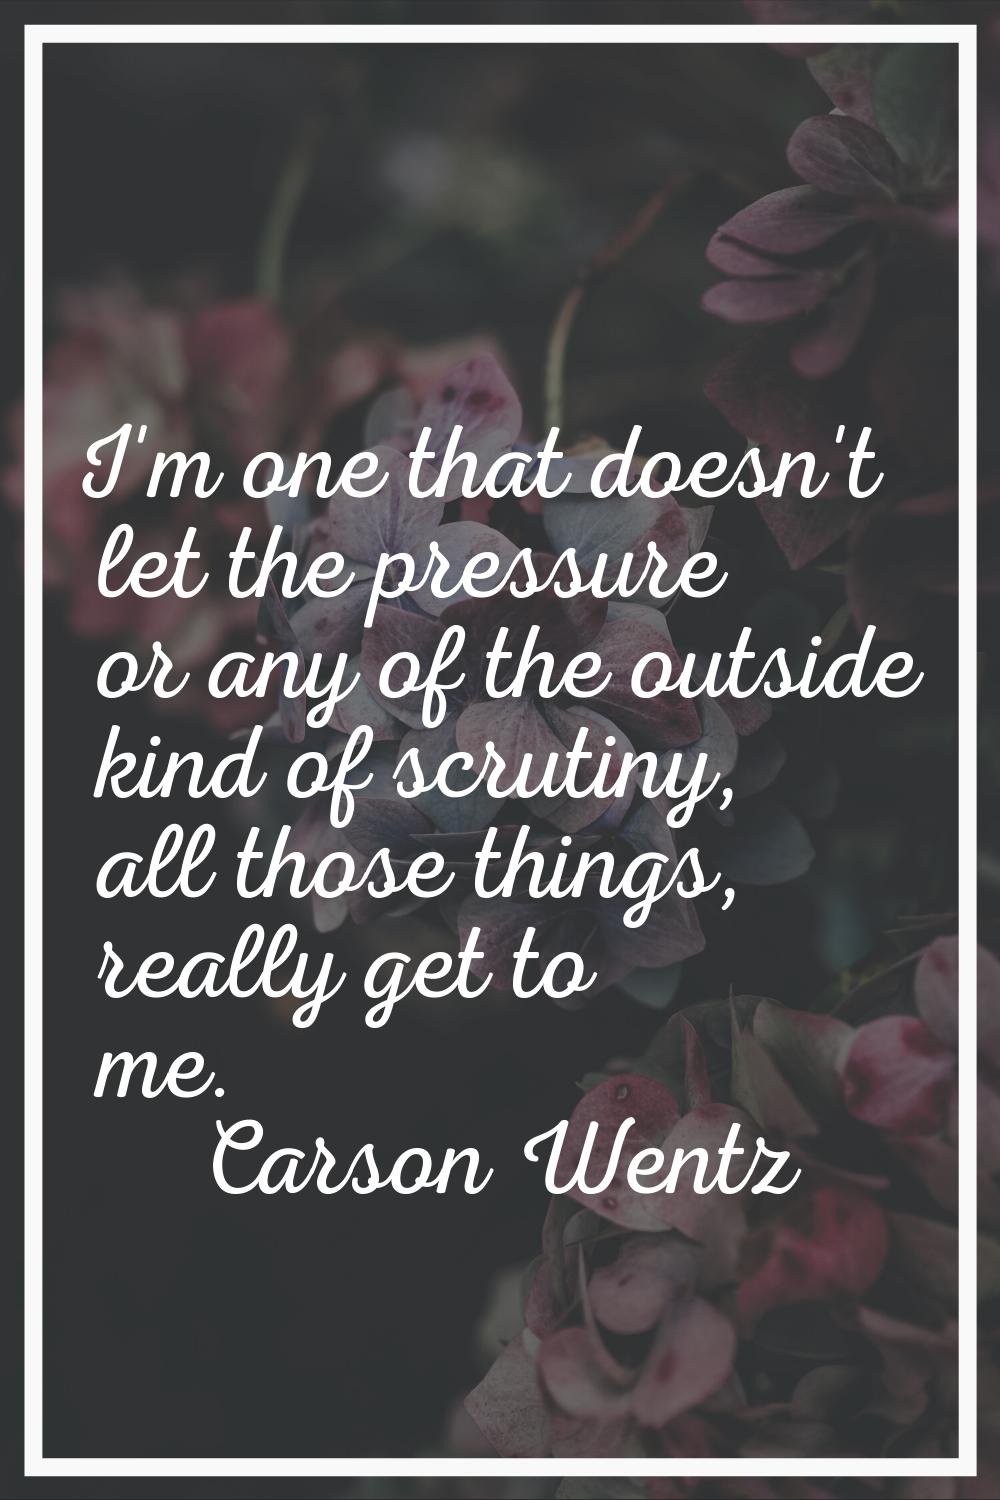 I'm one that doesn't let the pressure or any of the outside kind of scrutiny, all those things, rea